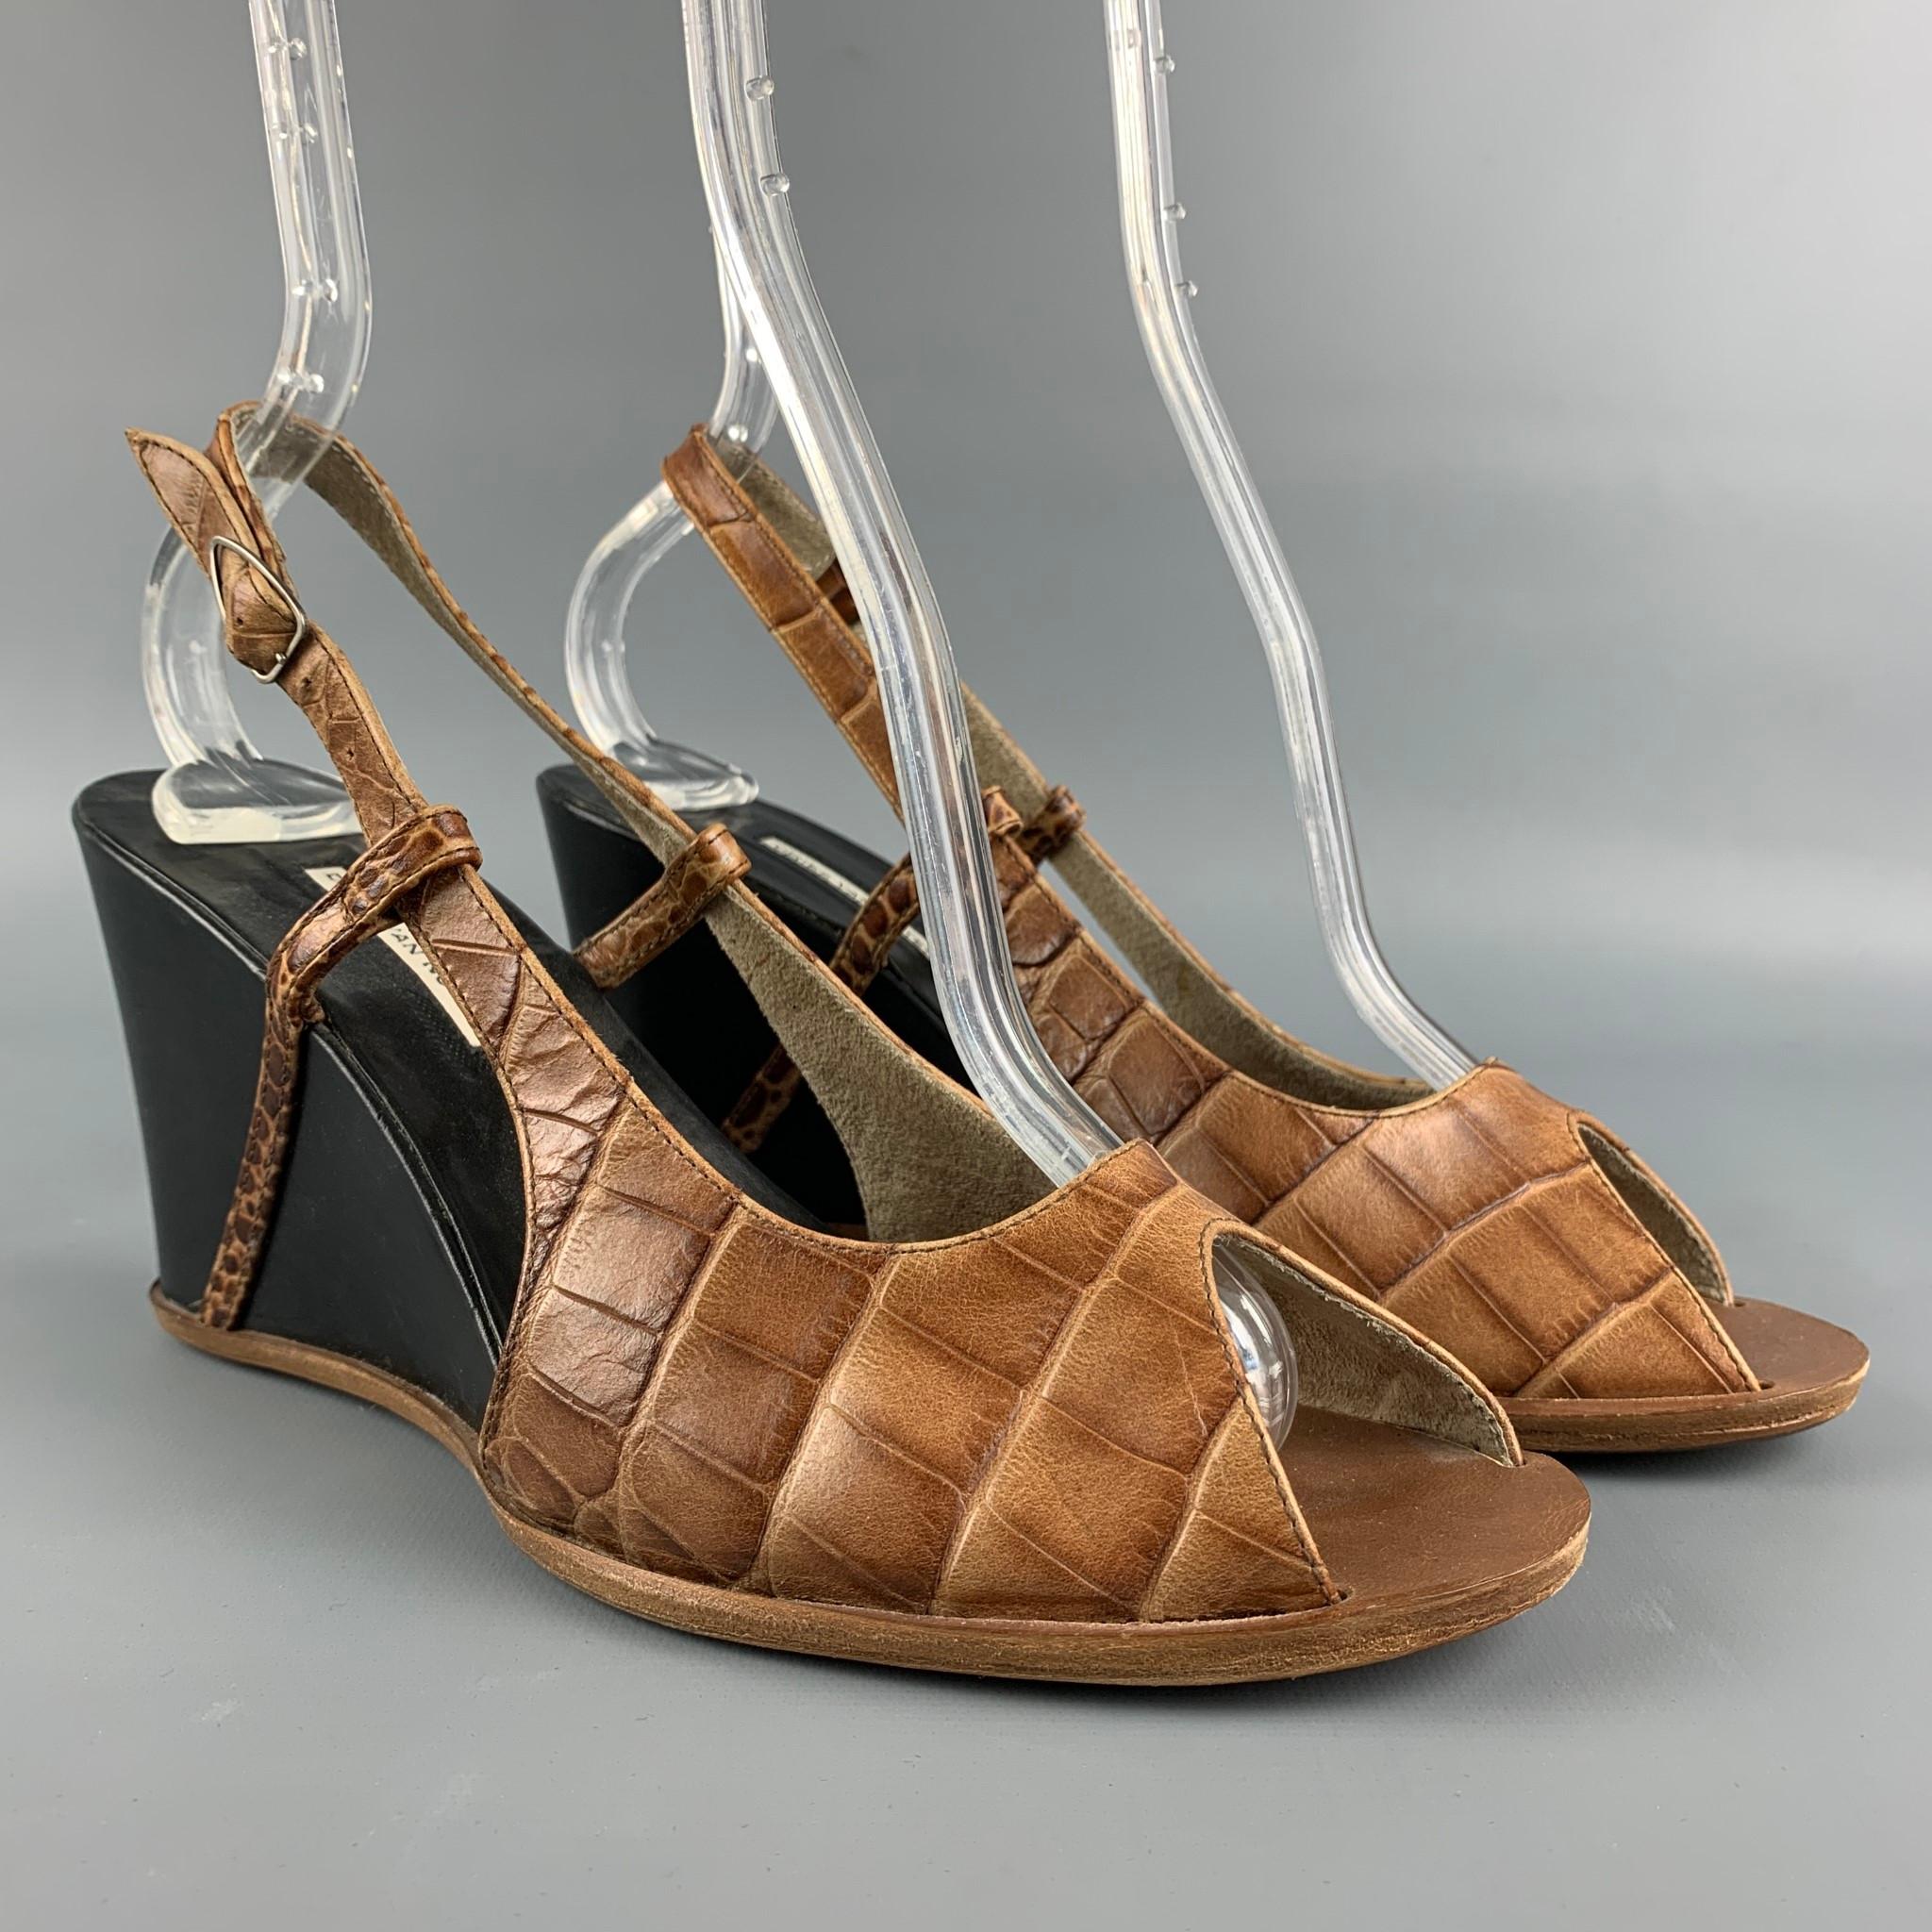 DRIES VAN NOTEN sandals comes in a tan & black embossed leather featuring a peep toe, strap closure, and a wedge heel. 

Good Pre-Owned Condition.
Marked: 38

Measurements:

Heel: 3 in. 